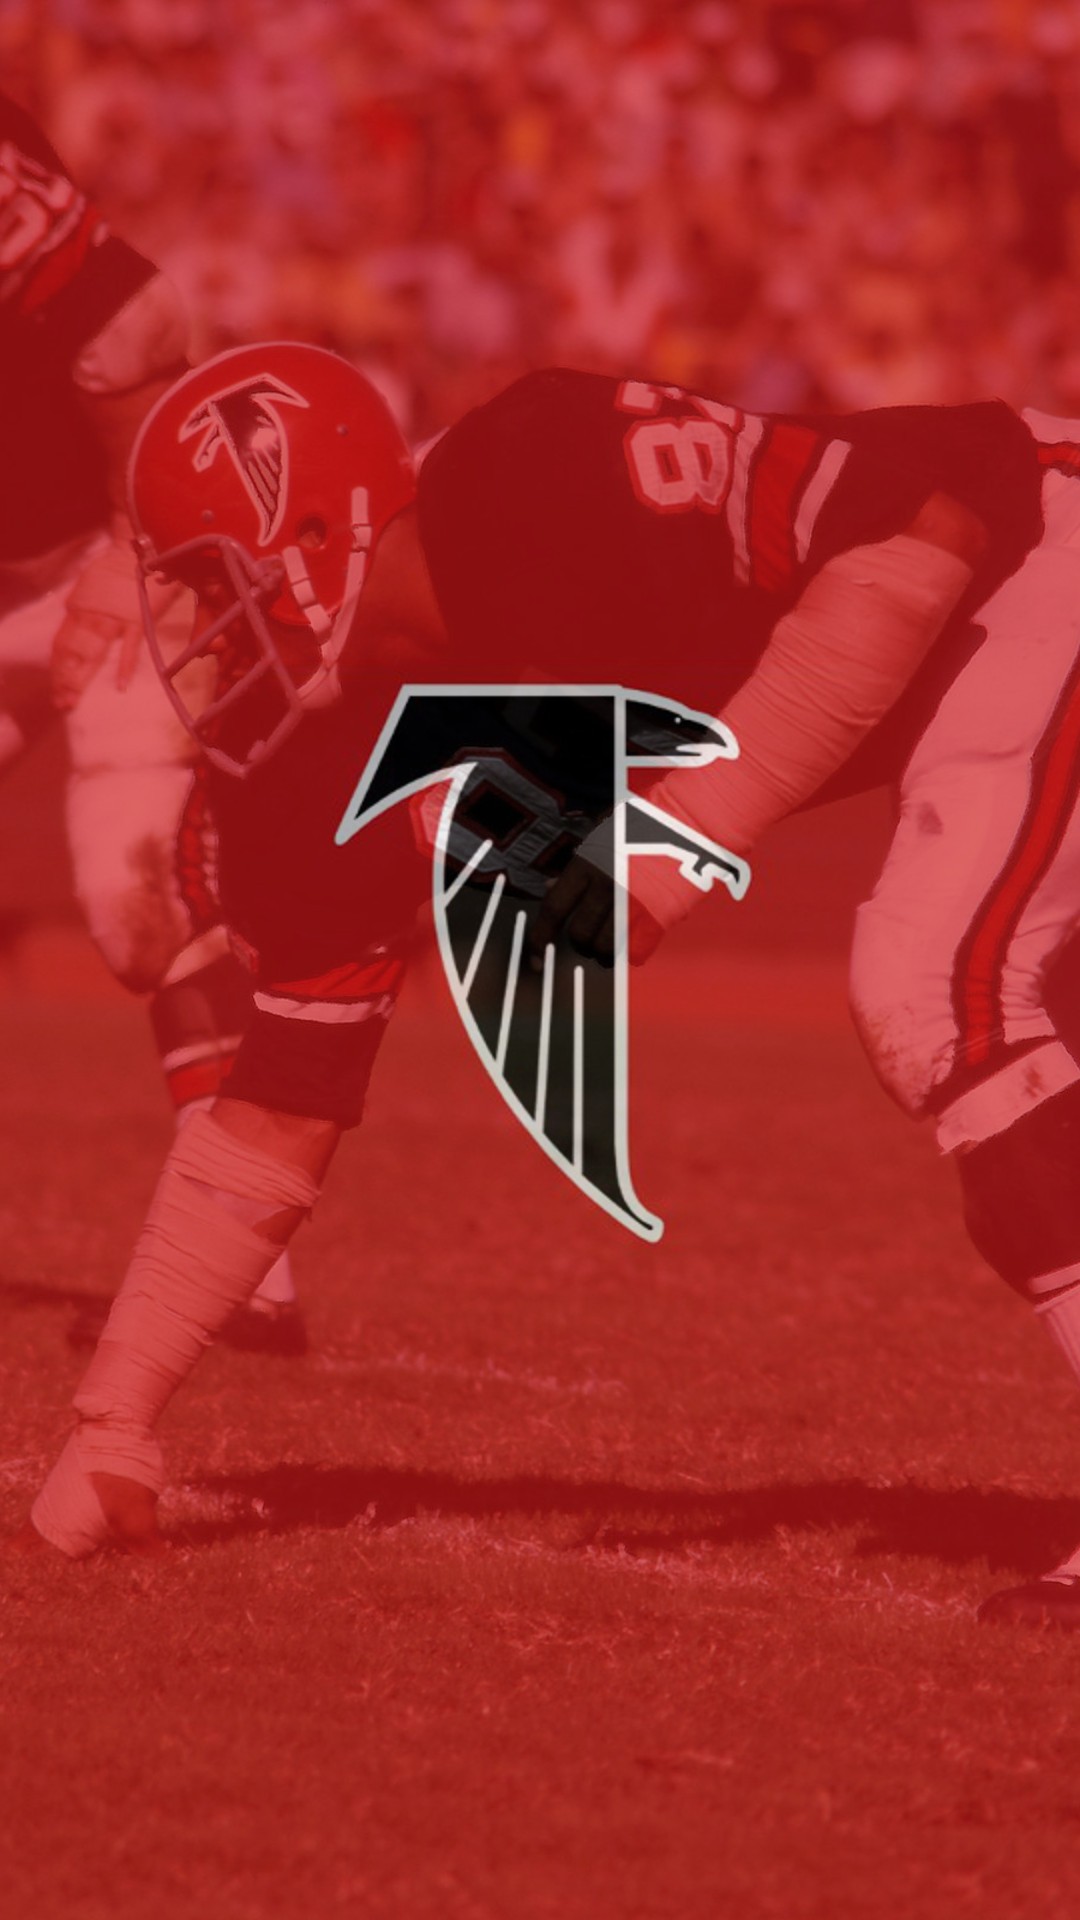 Atlanta Falcons iPhone 6 Wallpaper with high-resolution 1080x1920 pixel. Download and set as wallpaper for Apple iPhone X, XS Max, XR, 8, 7, 6, SE, iPad, Android